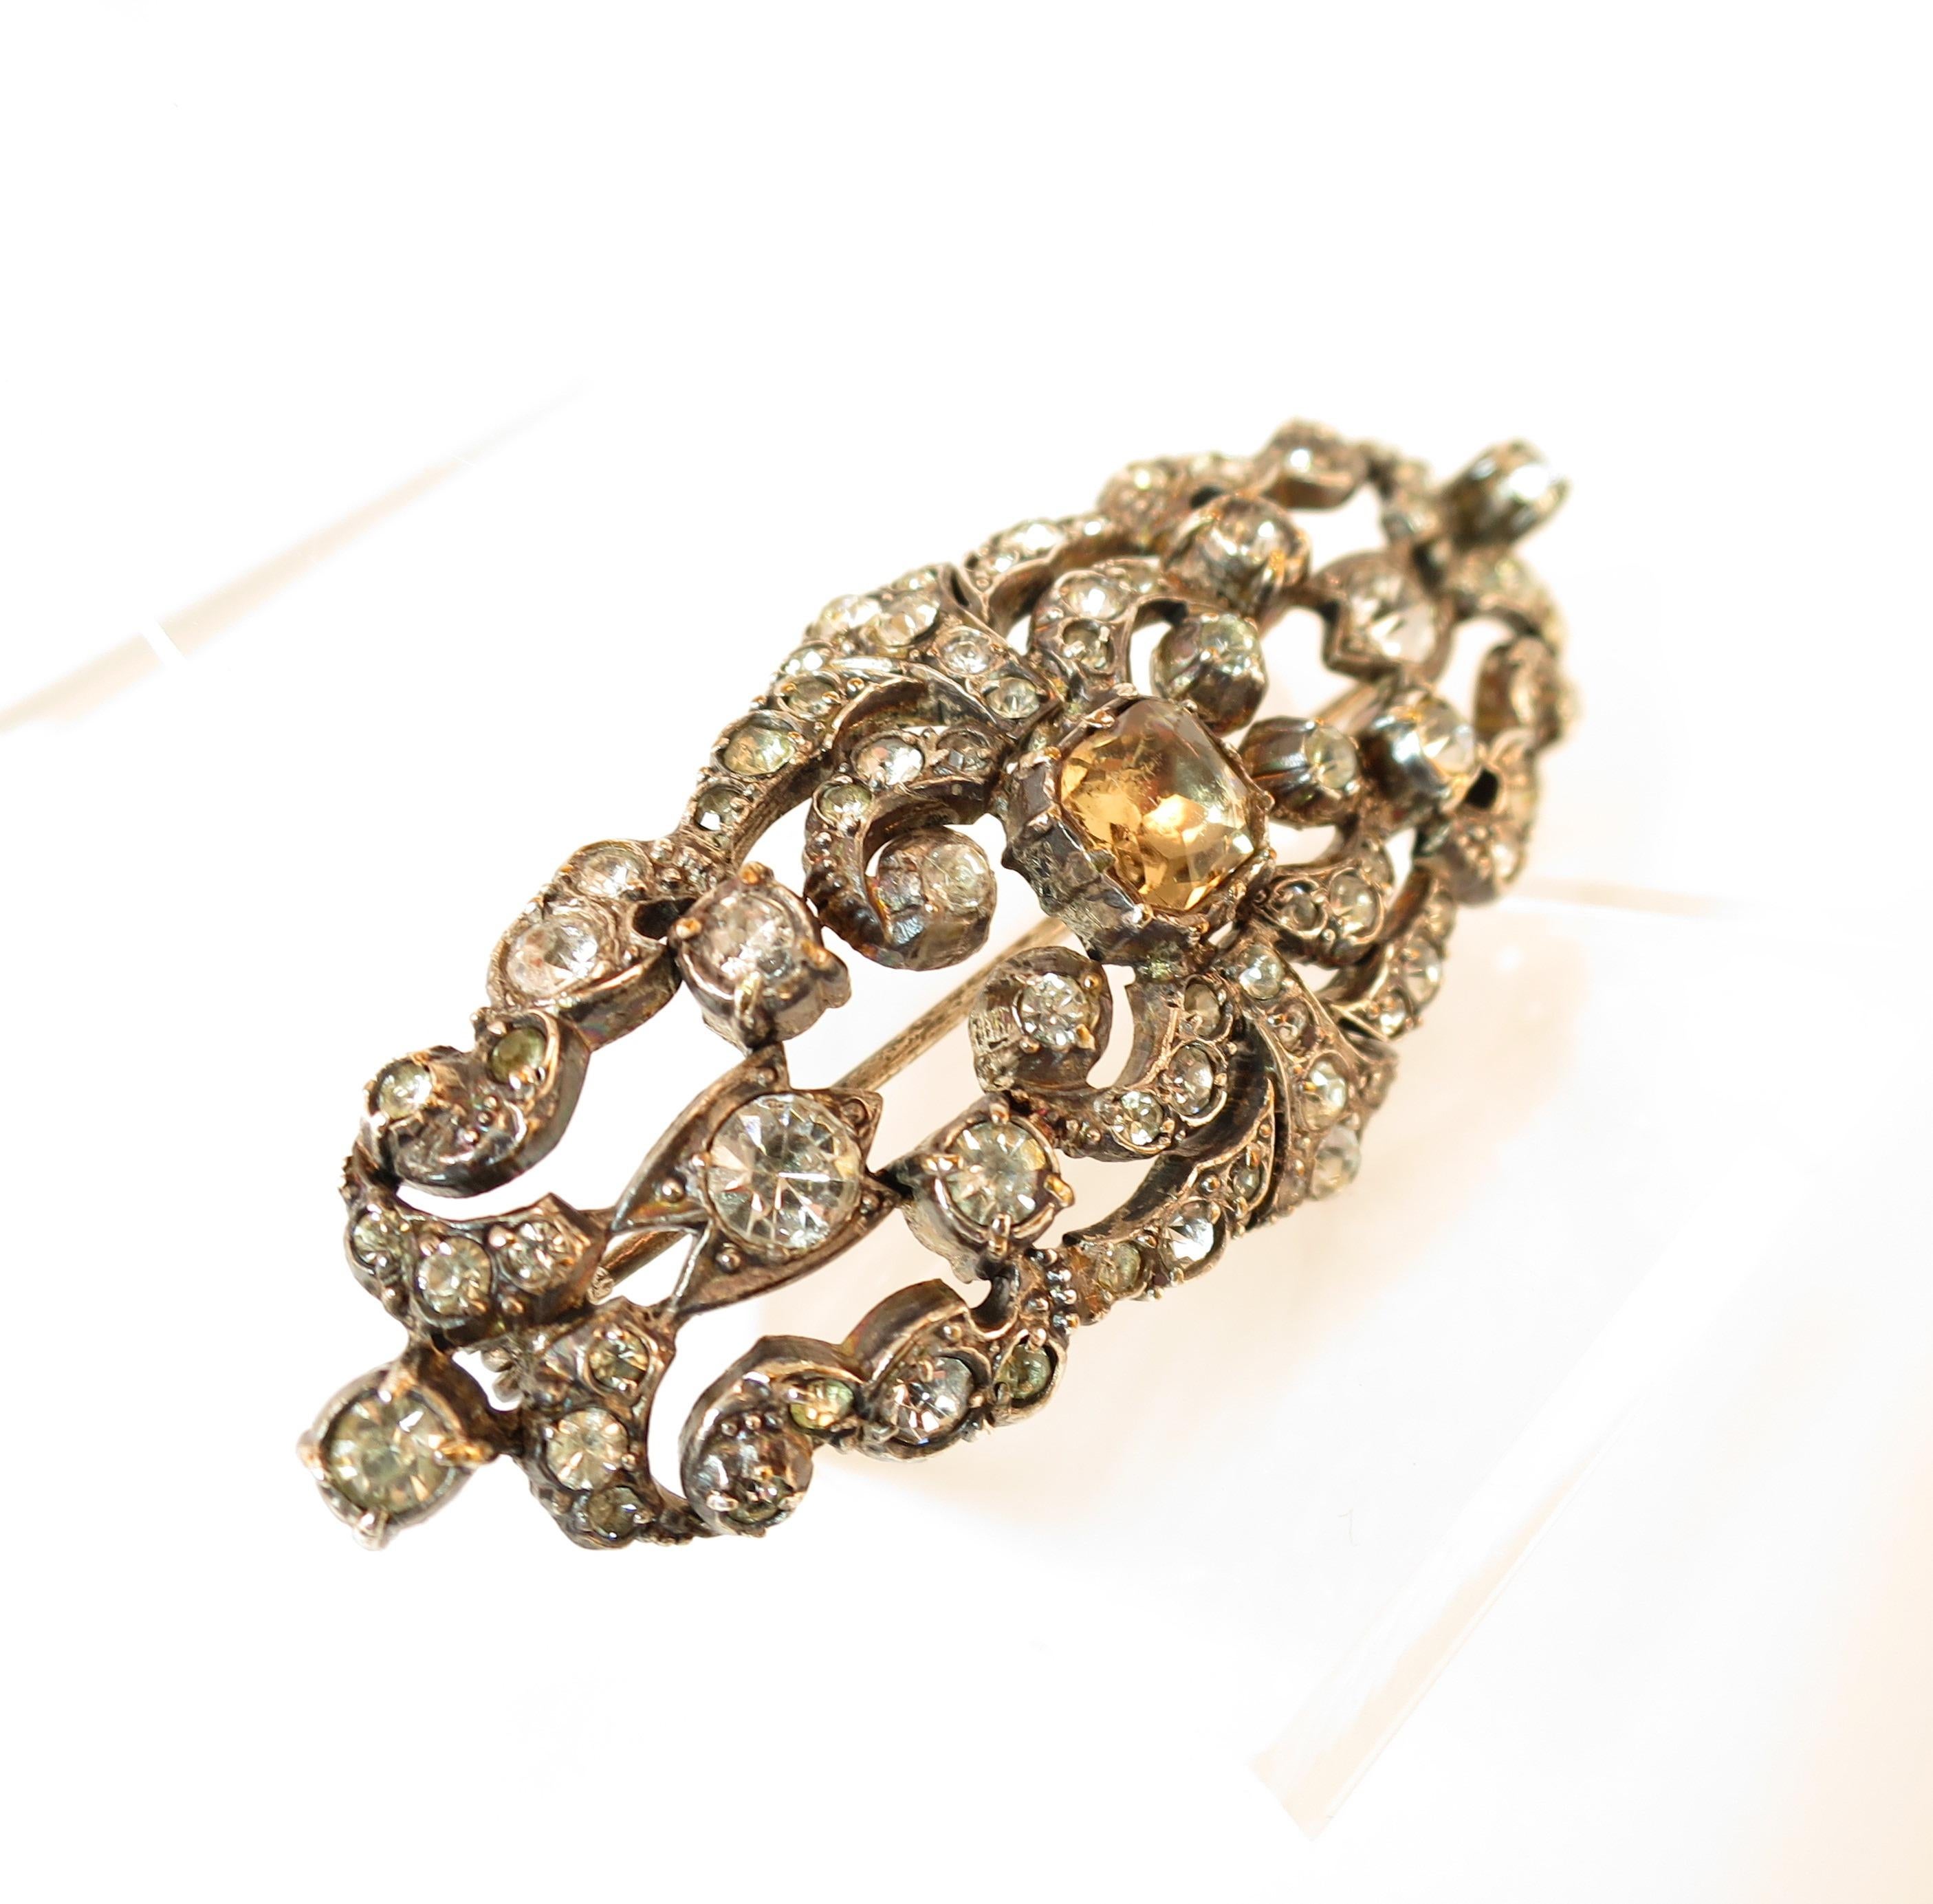 Offered here is an Edwardian hand-fashioned sterling silver brooch set with French paste stones, Circa 1905. Within the elongated oval and slightly domed shape of the brooch, there is an elaborate curving foliate cut-work design; it is embellished